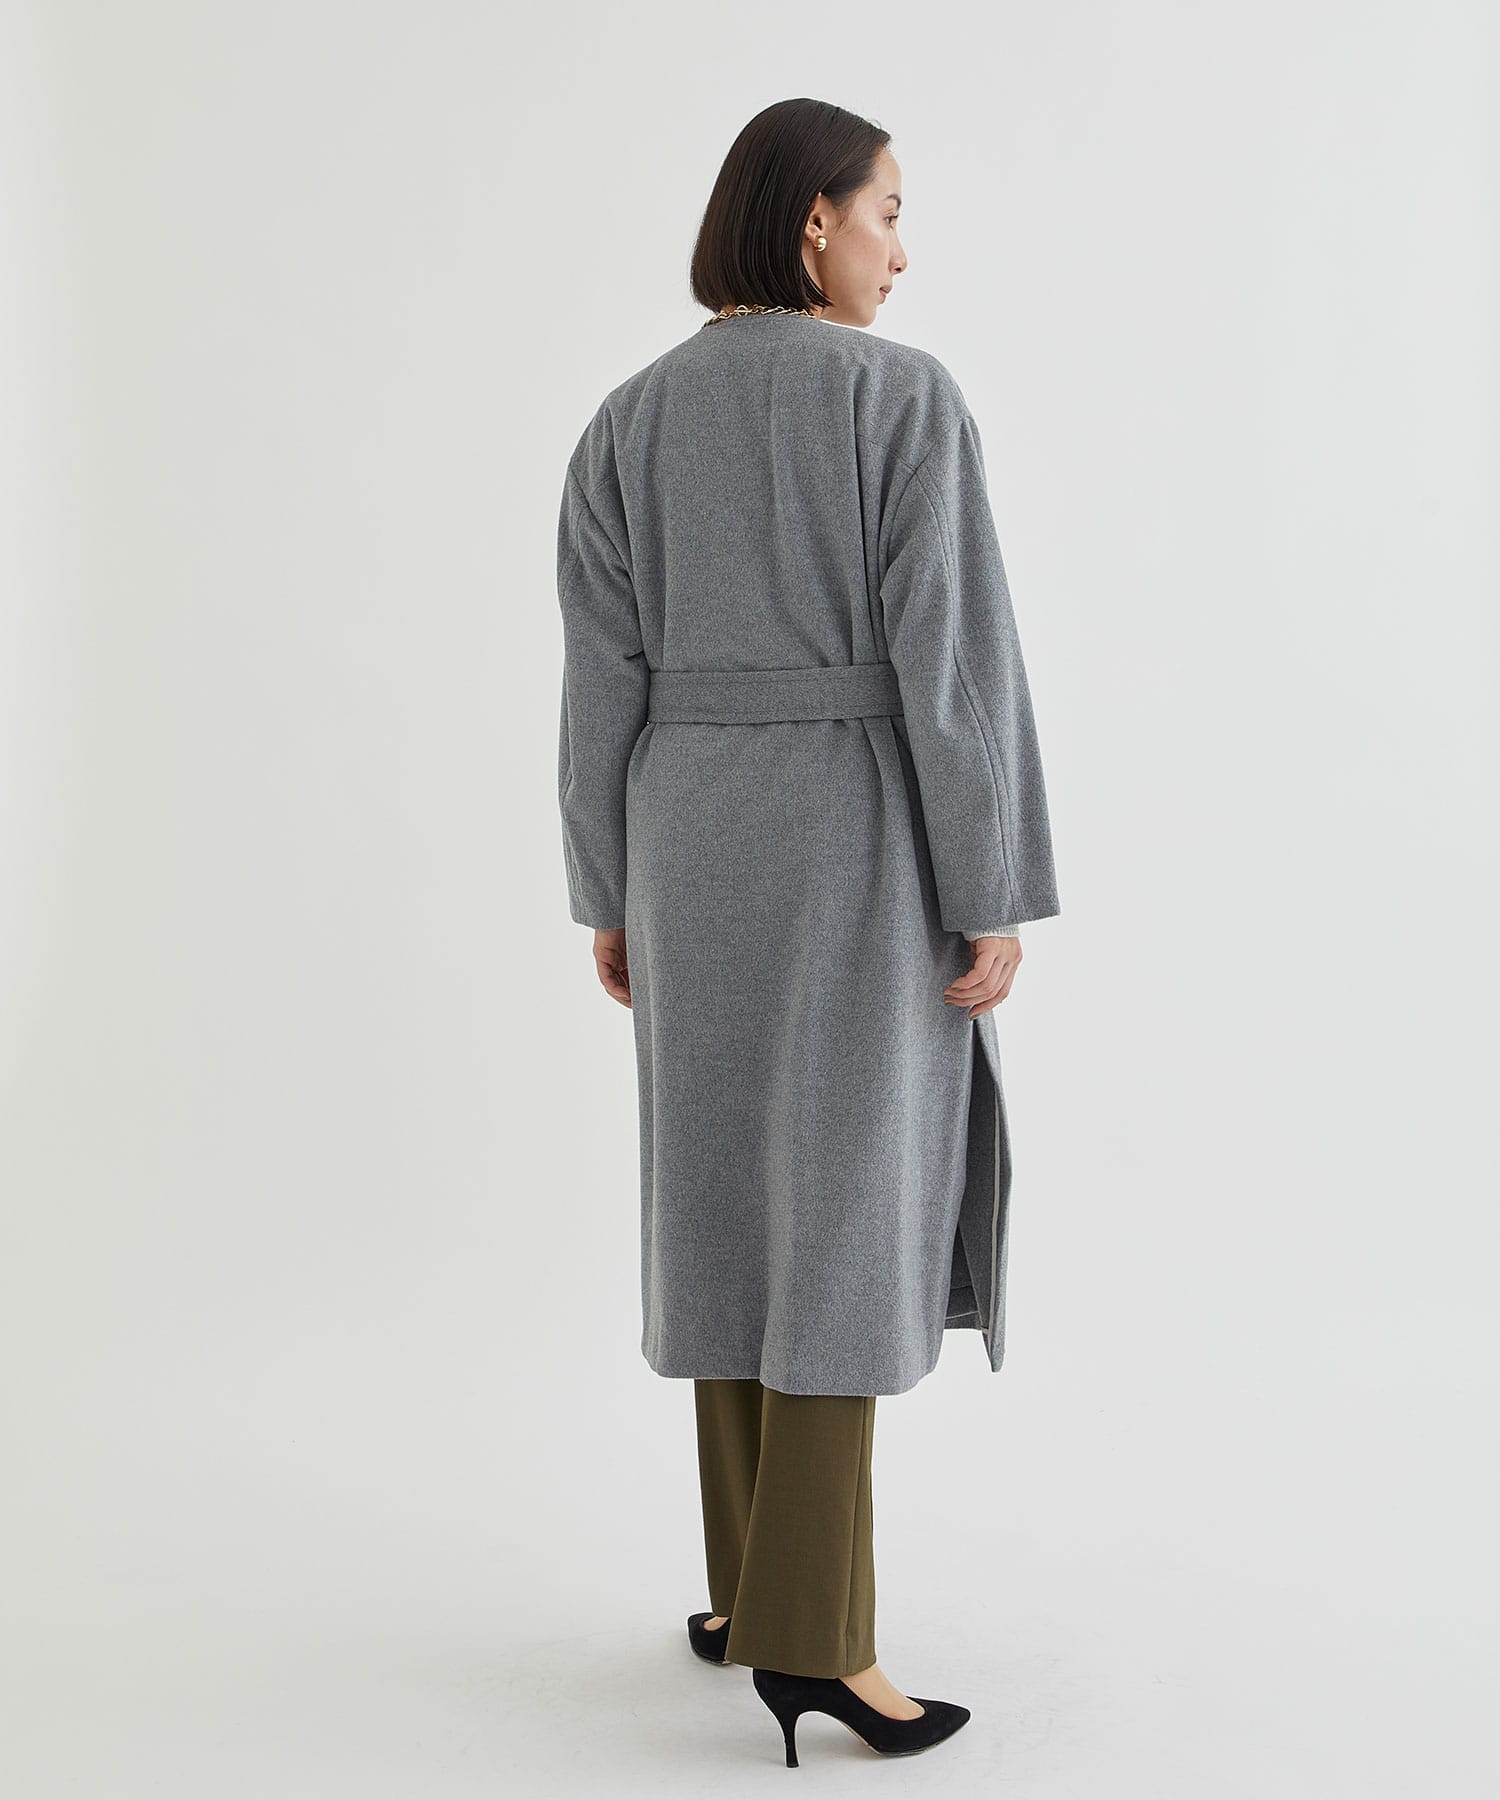 belted no collar wool coat(36 GREY): THE PERMANENT EYE: WOMENS 